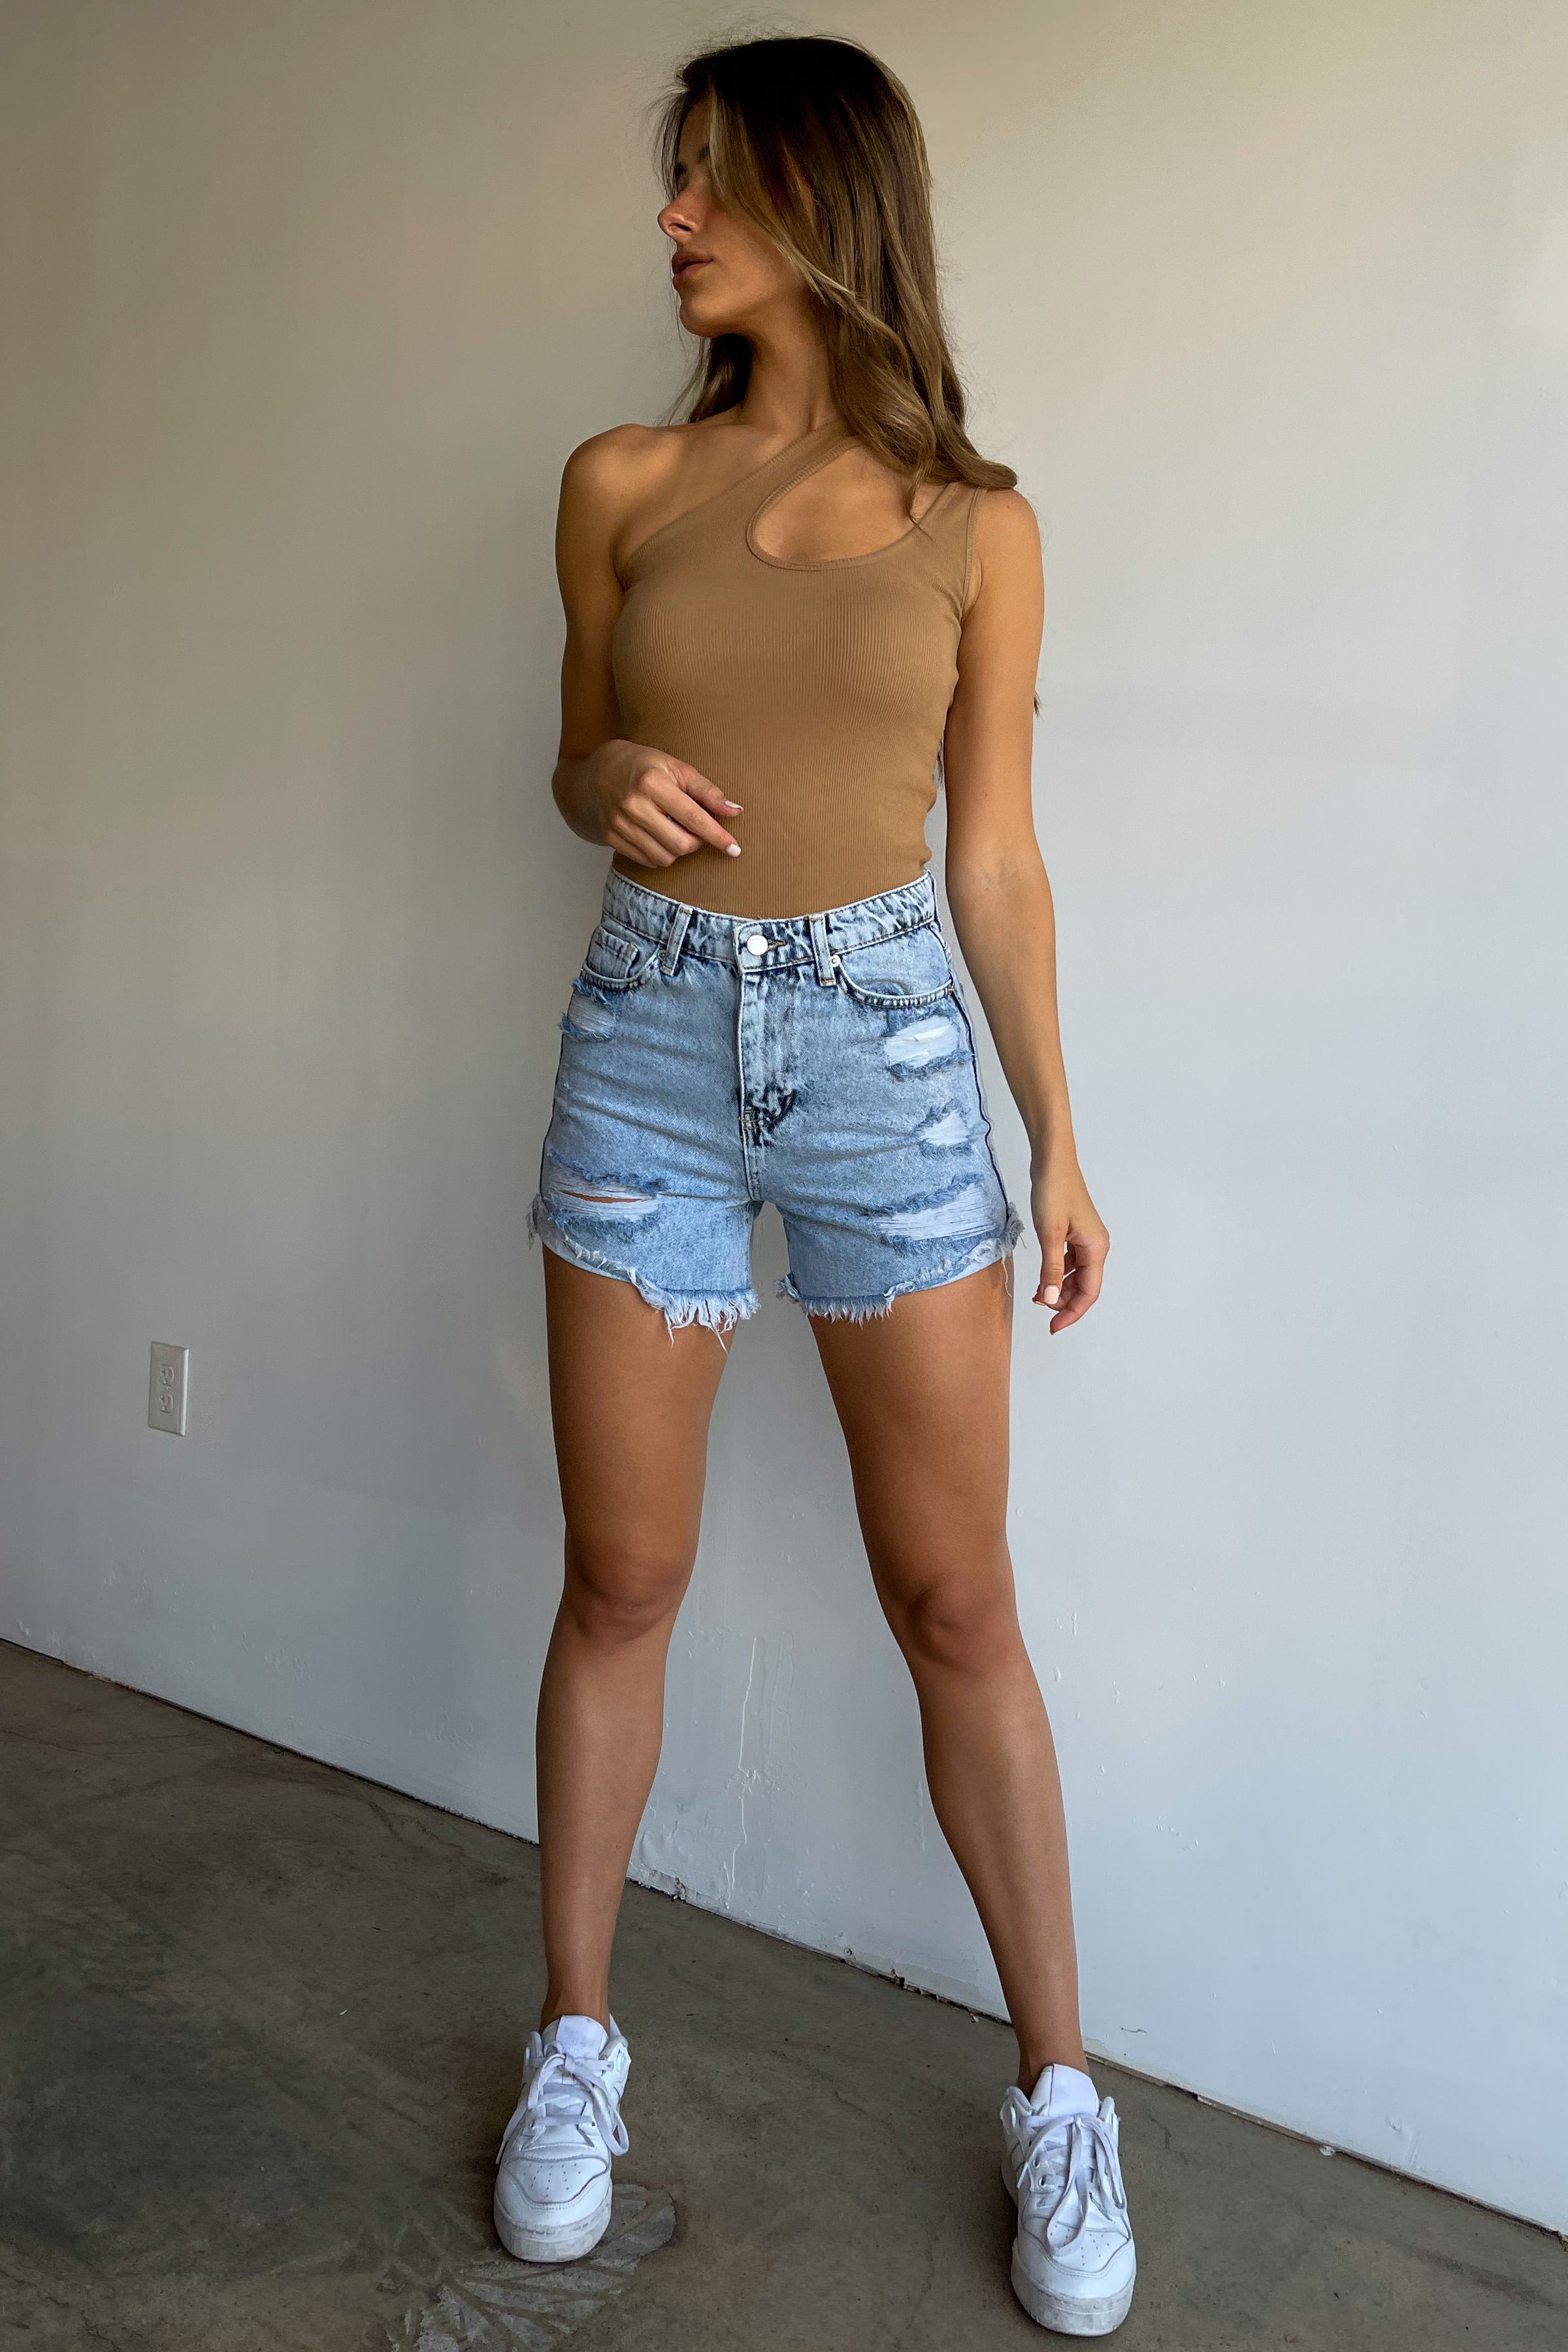 Ripped denim shorts are timeless, comfy and absolute favourite | HT Shop Now